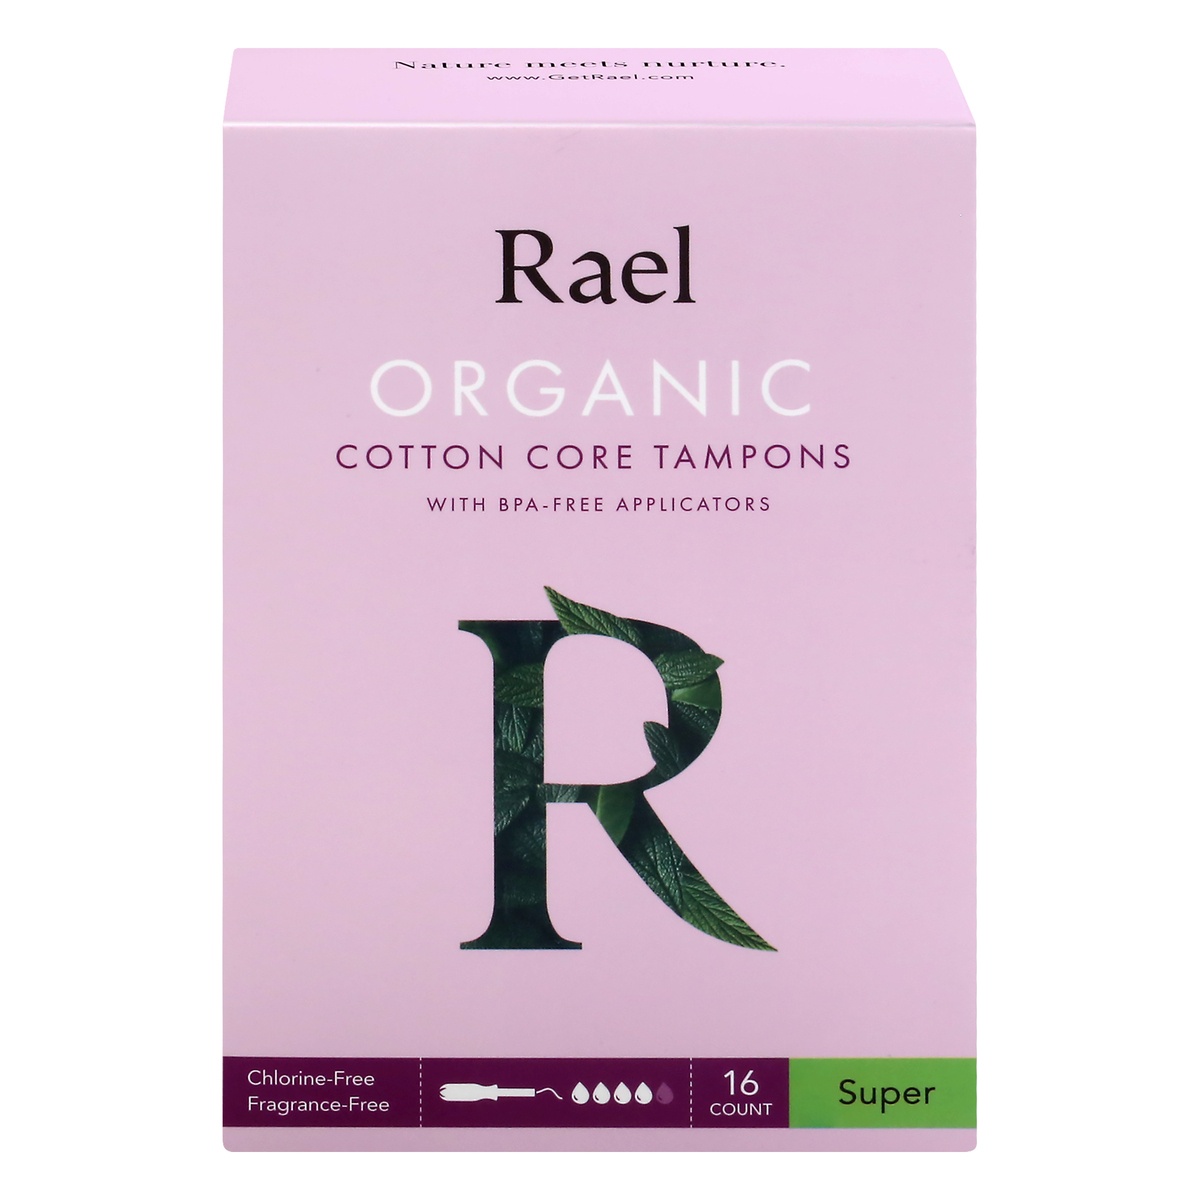 Rael wholesale products